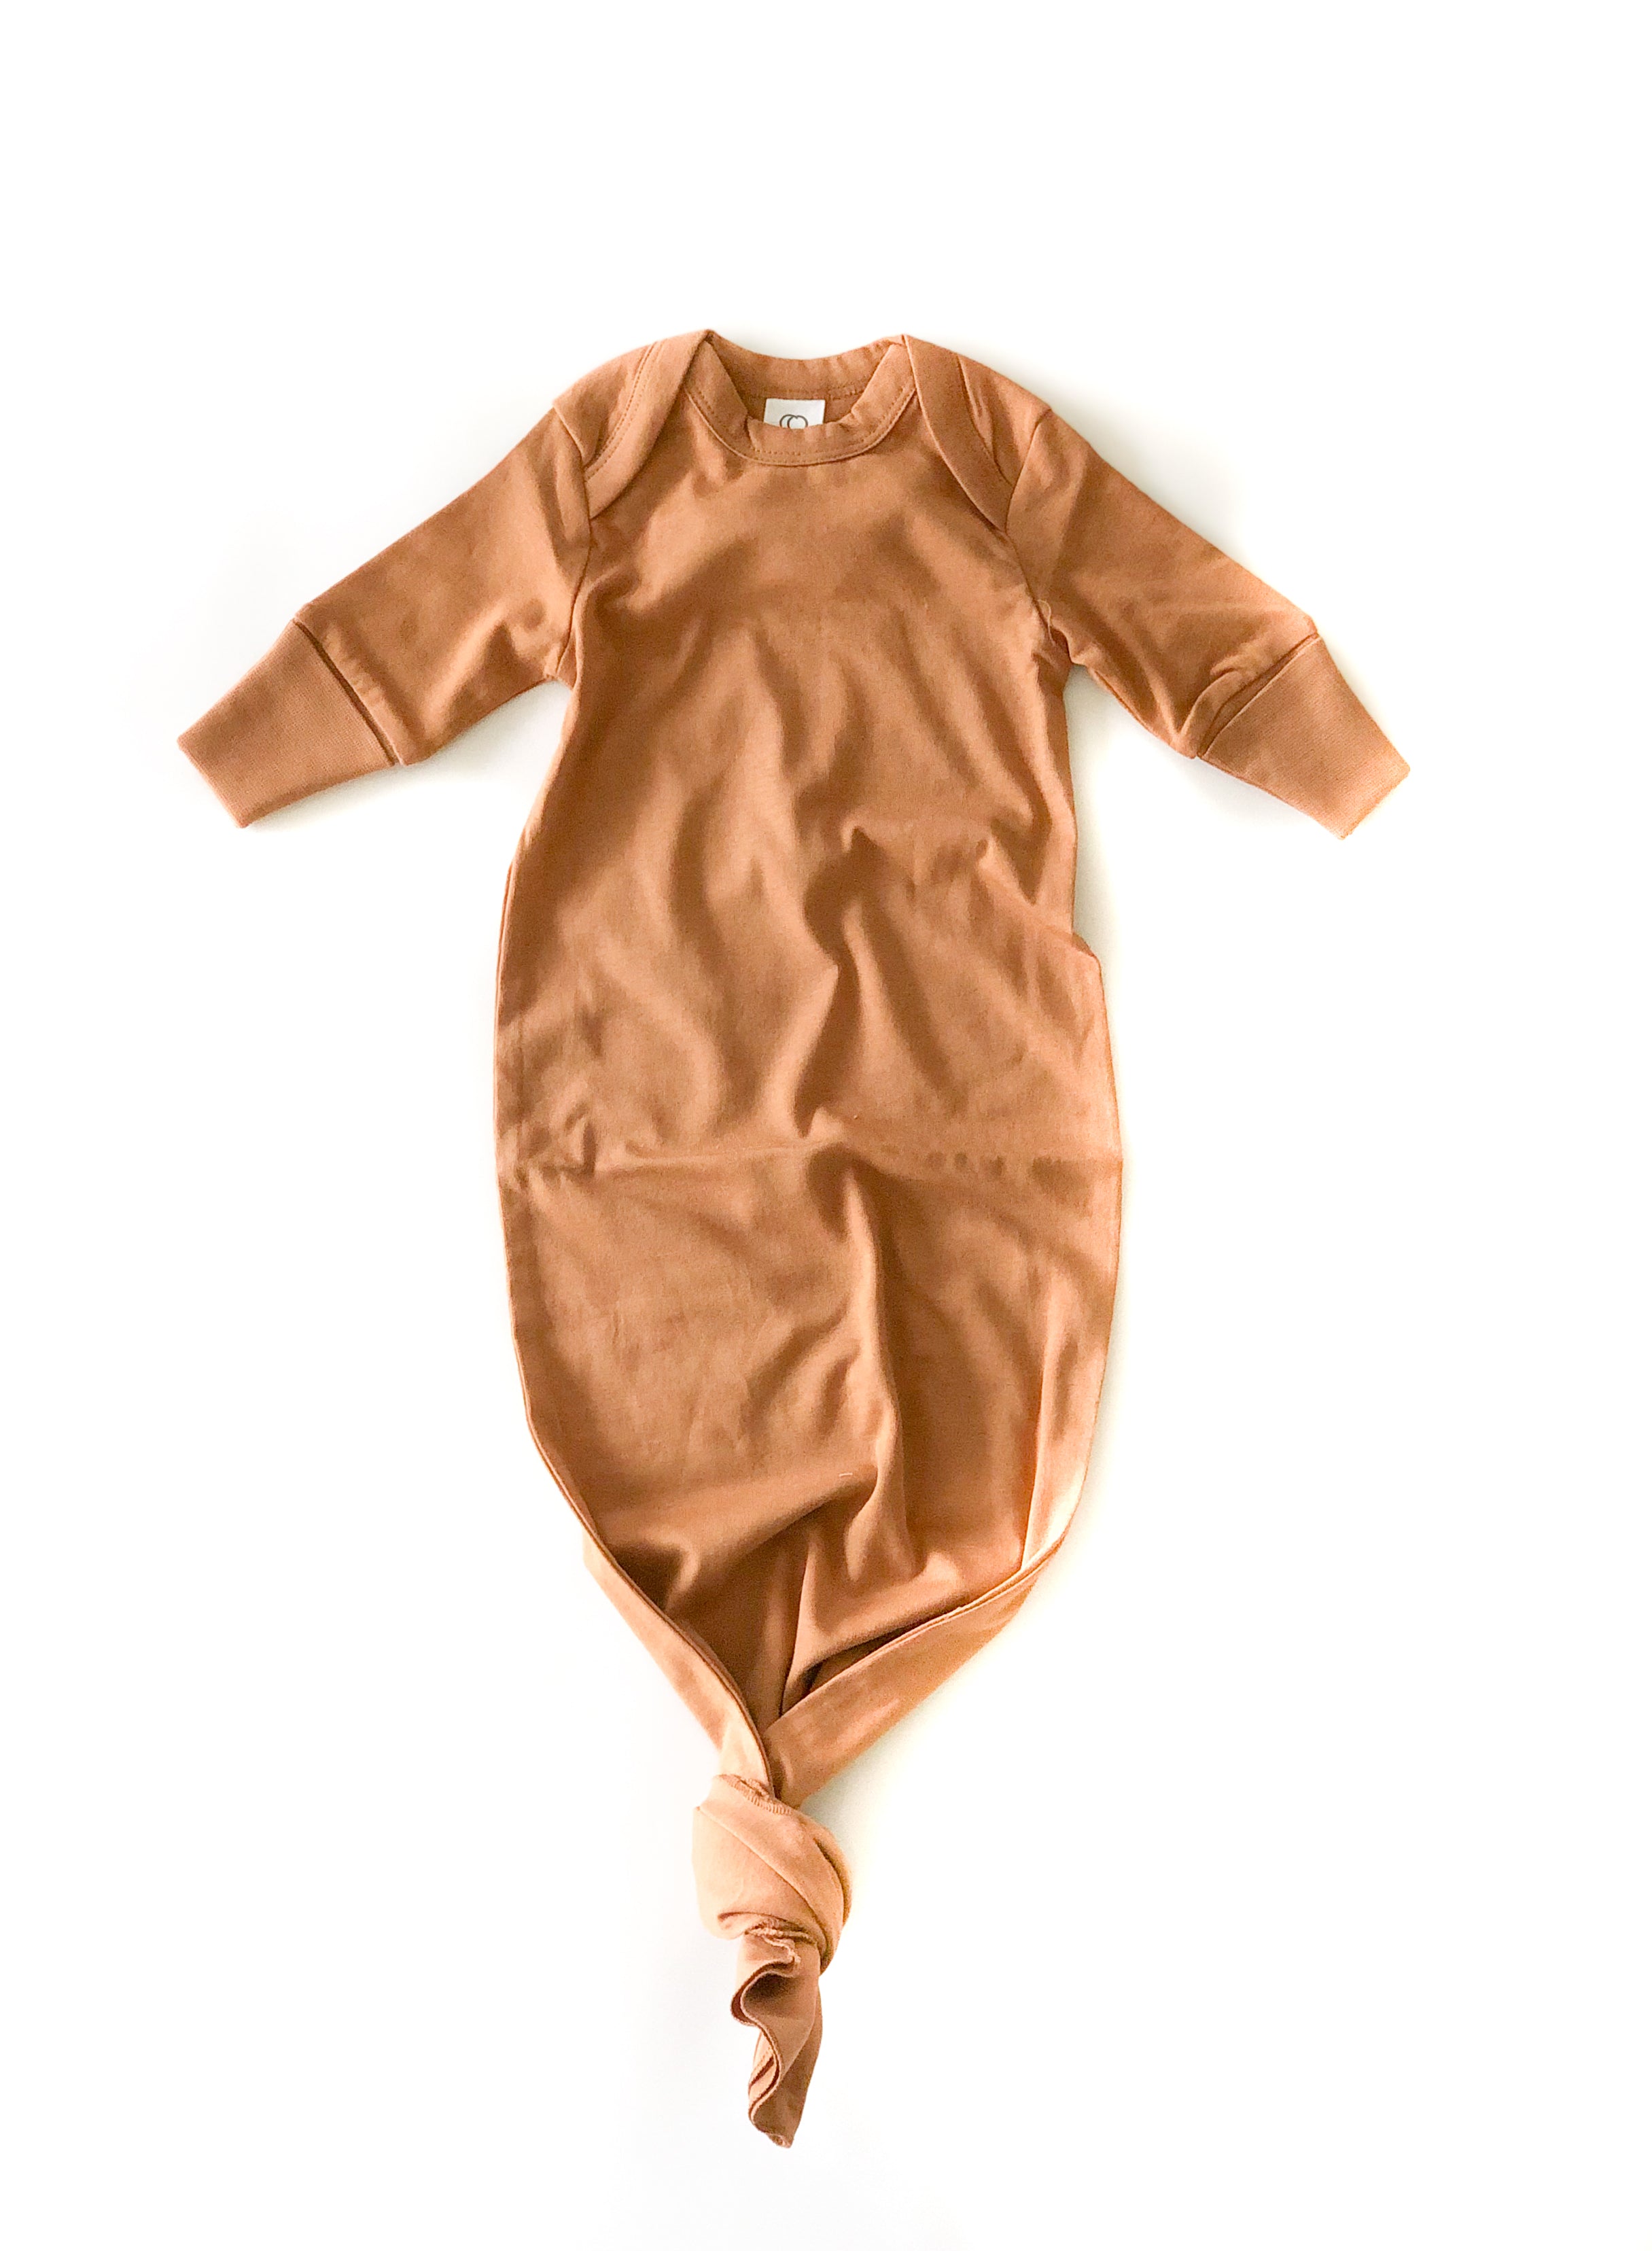 infant sleeper gowns